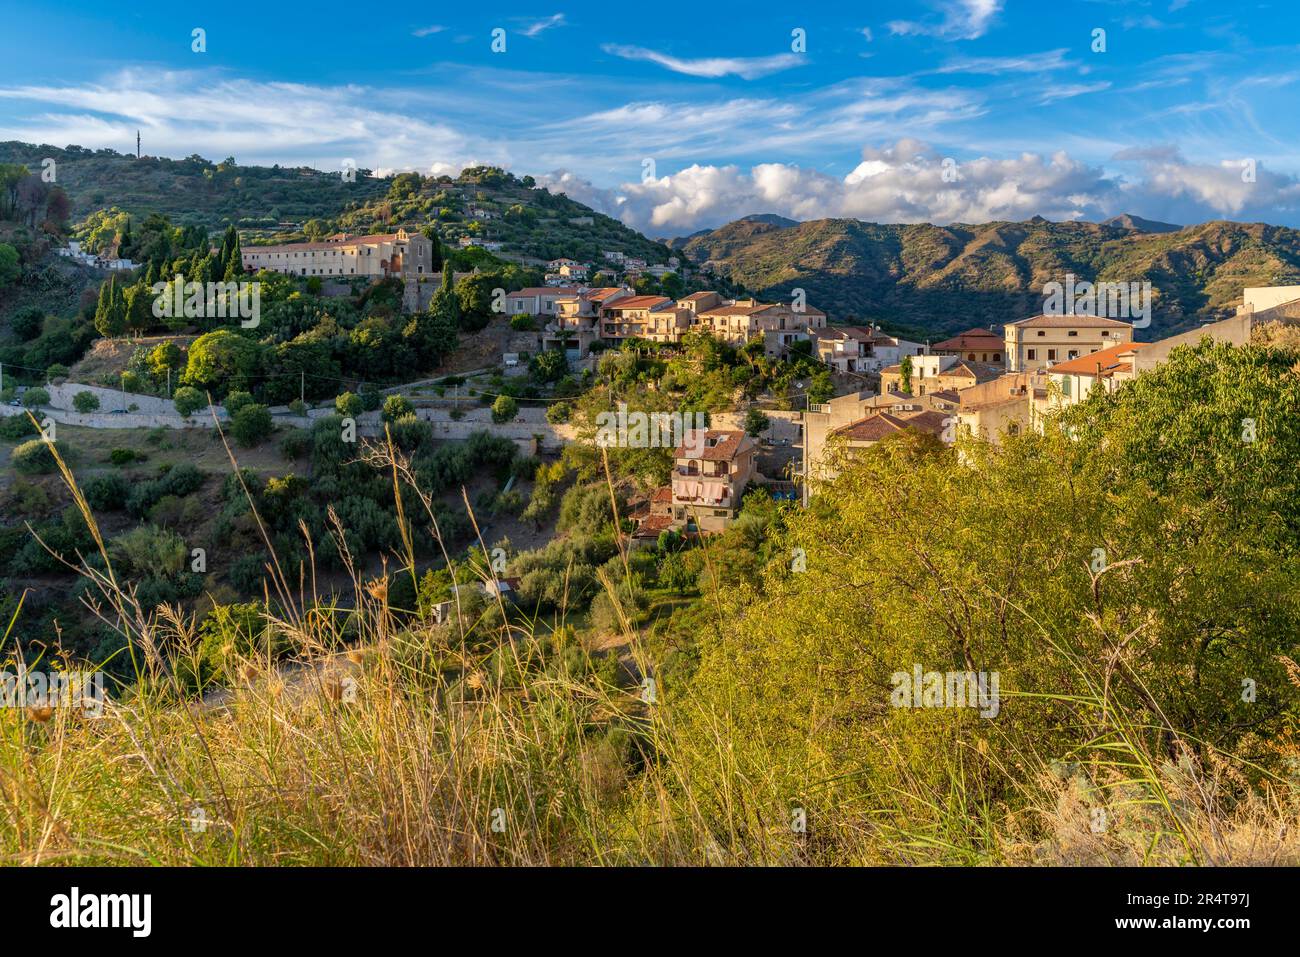 View of town of Savoca at sunset, Savoca, Messina, Sicily, Italy, Europe Stock Photo